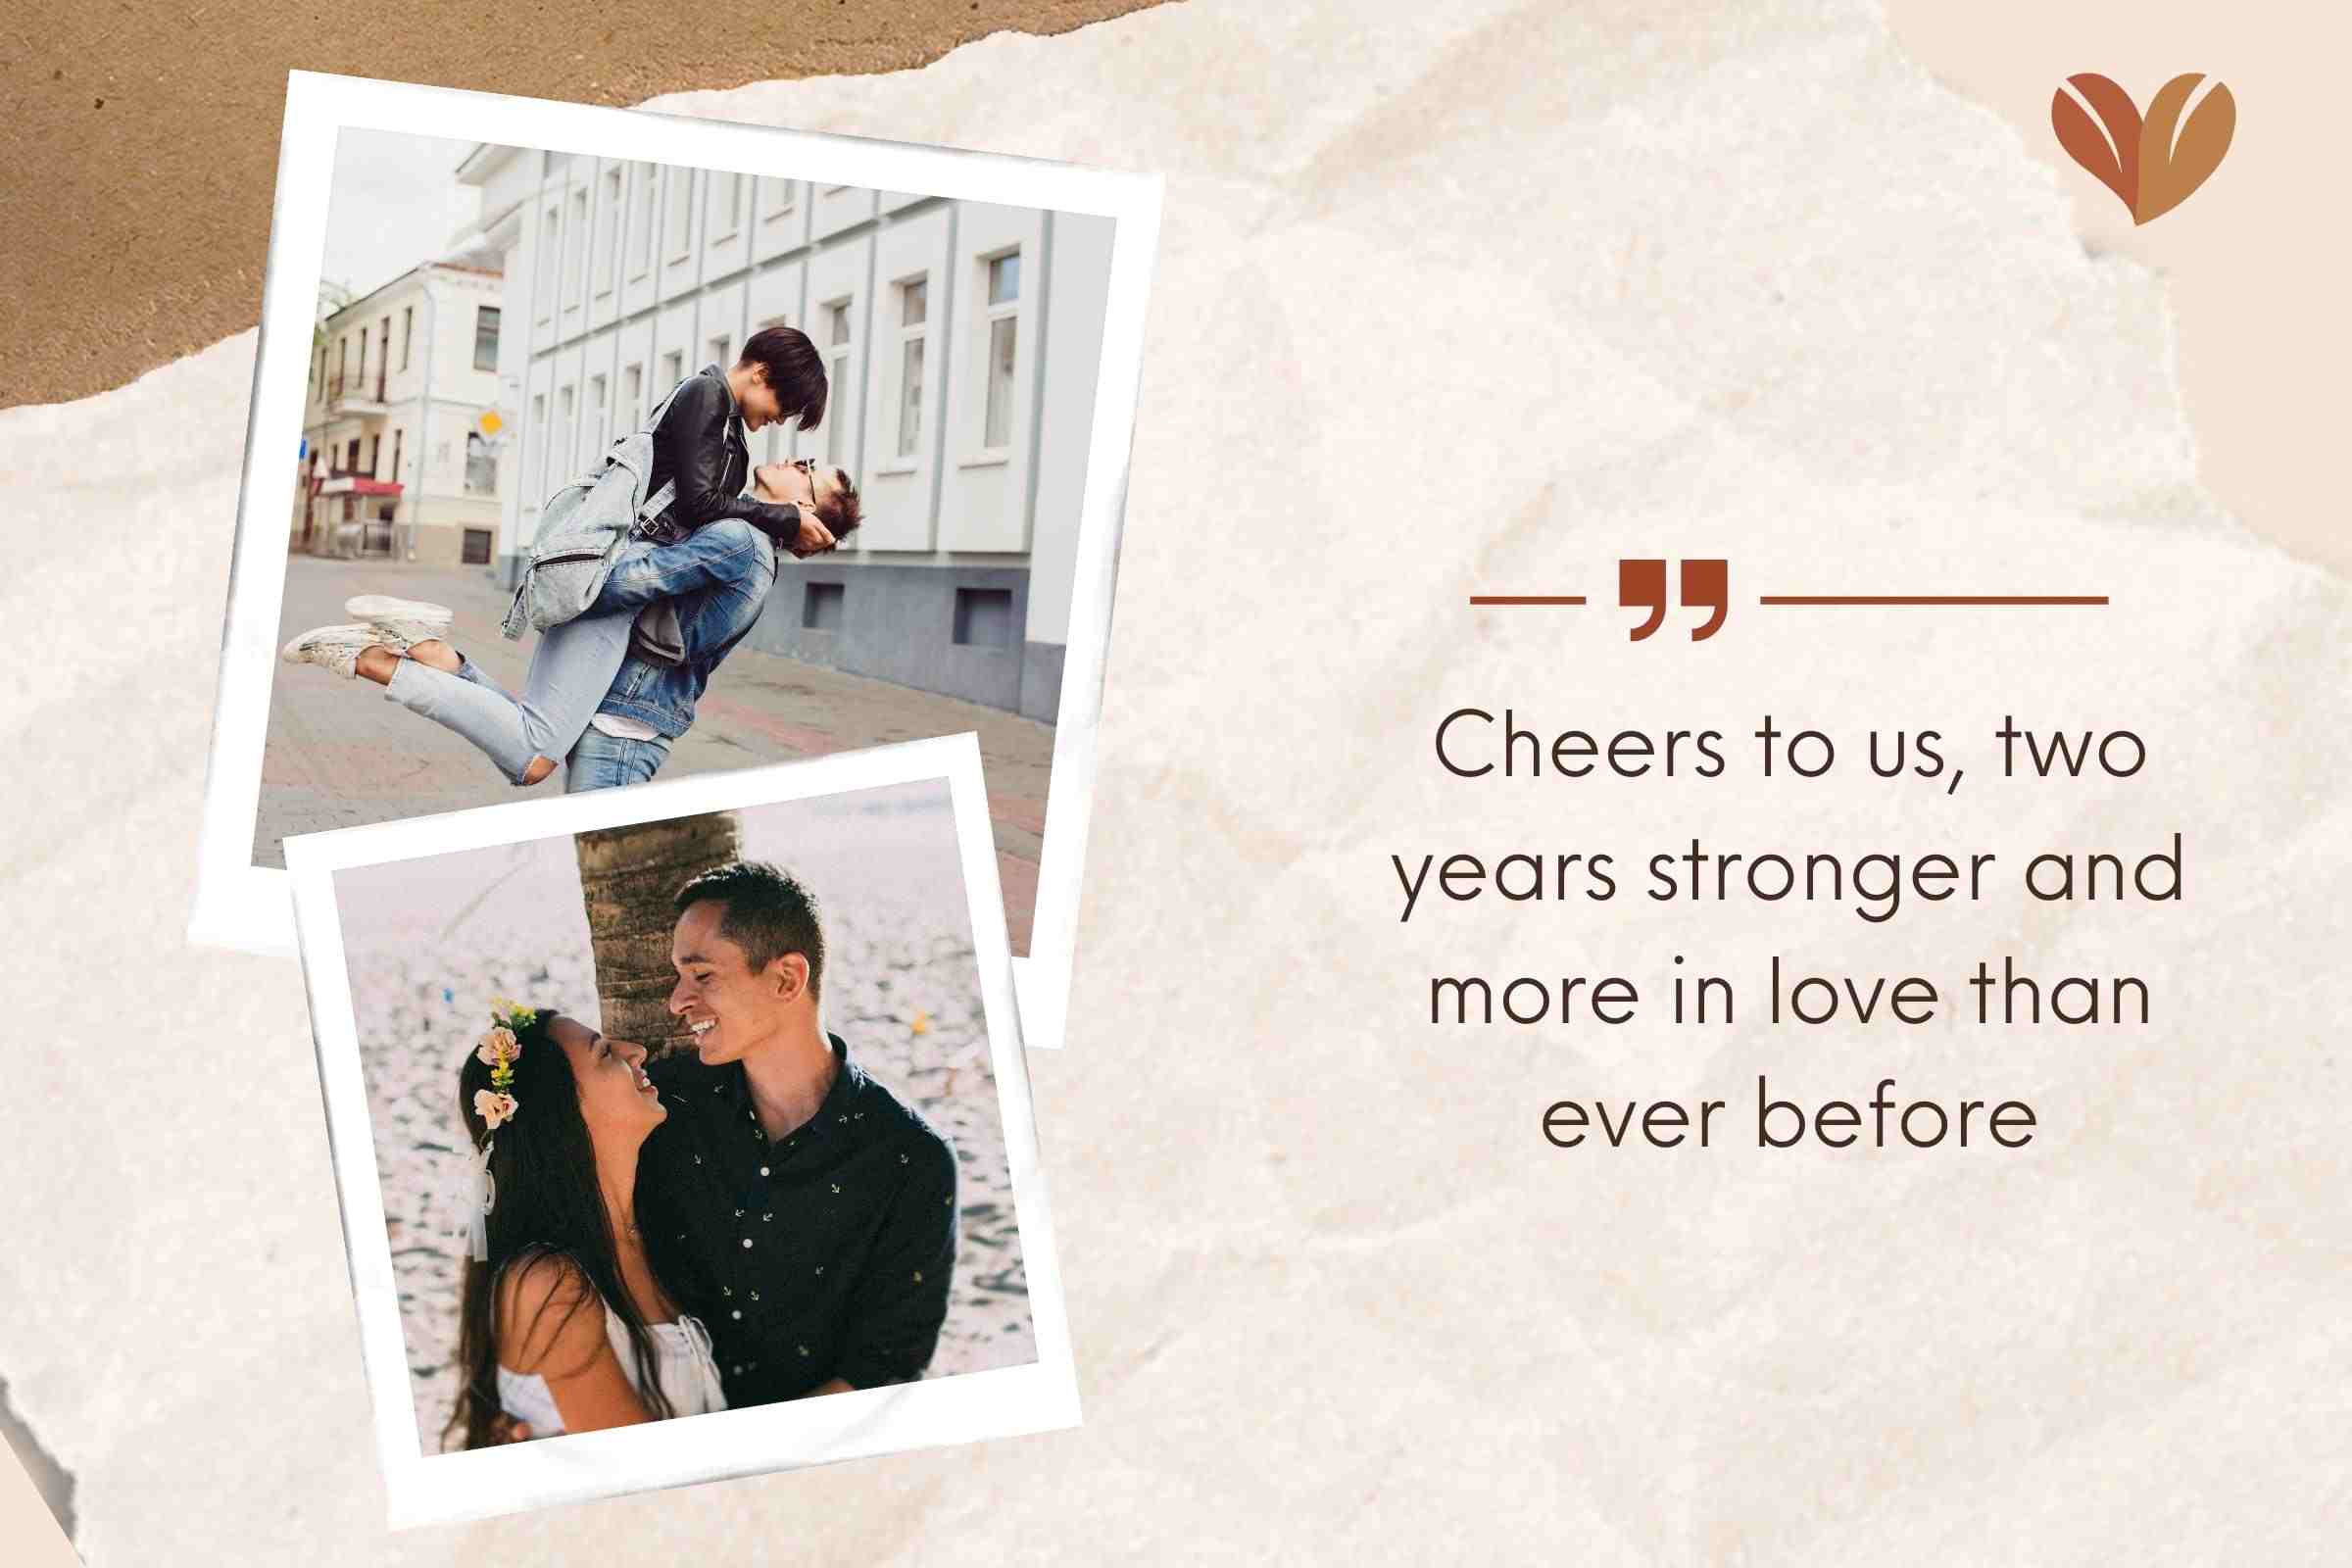 Marking two years of happiness with touching and inspiring anniversary quotes